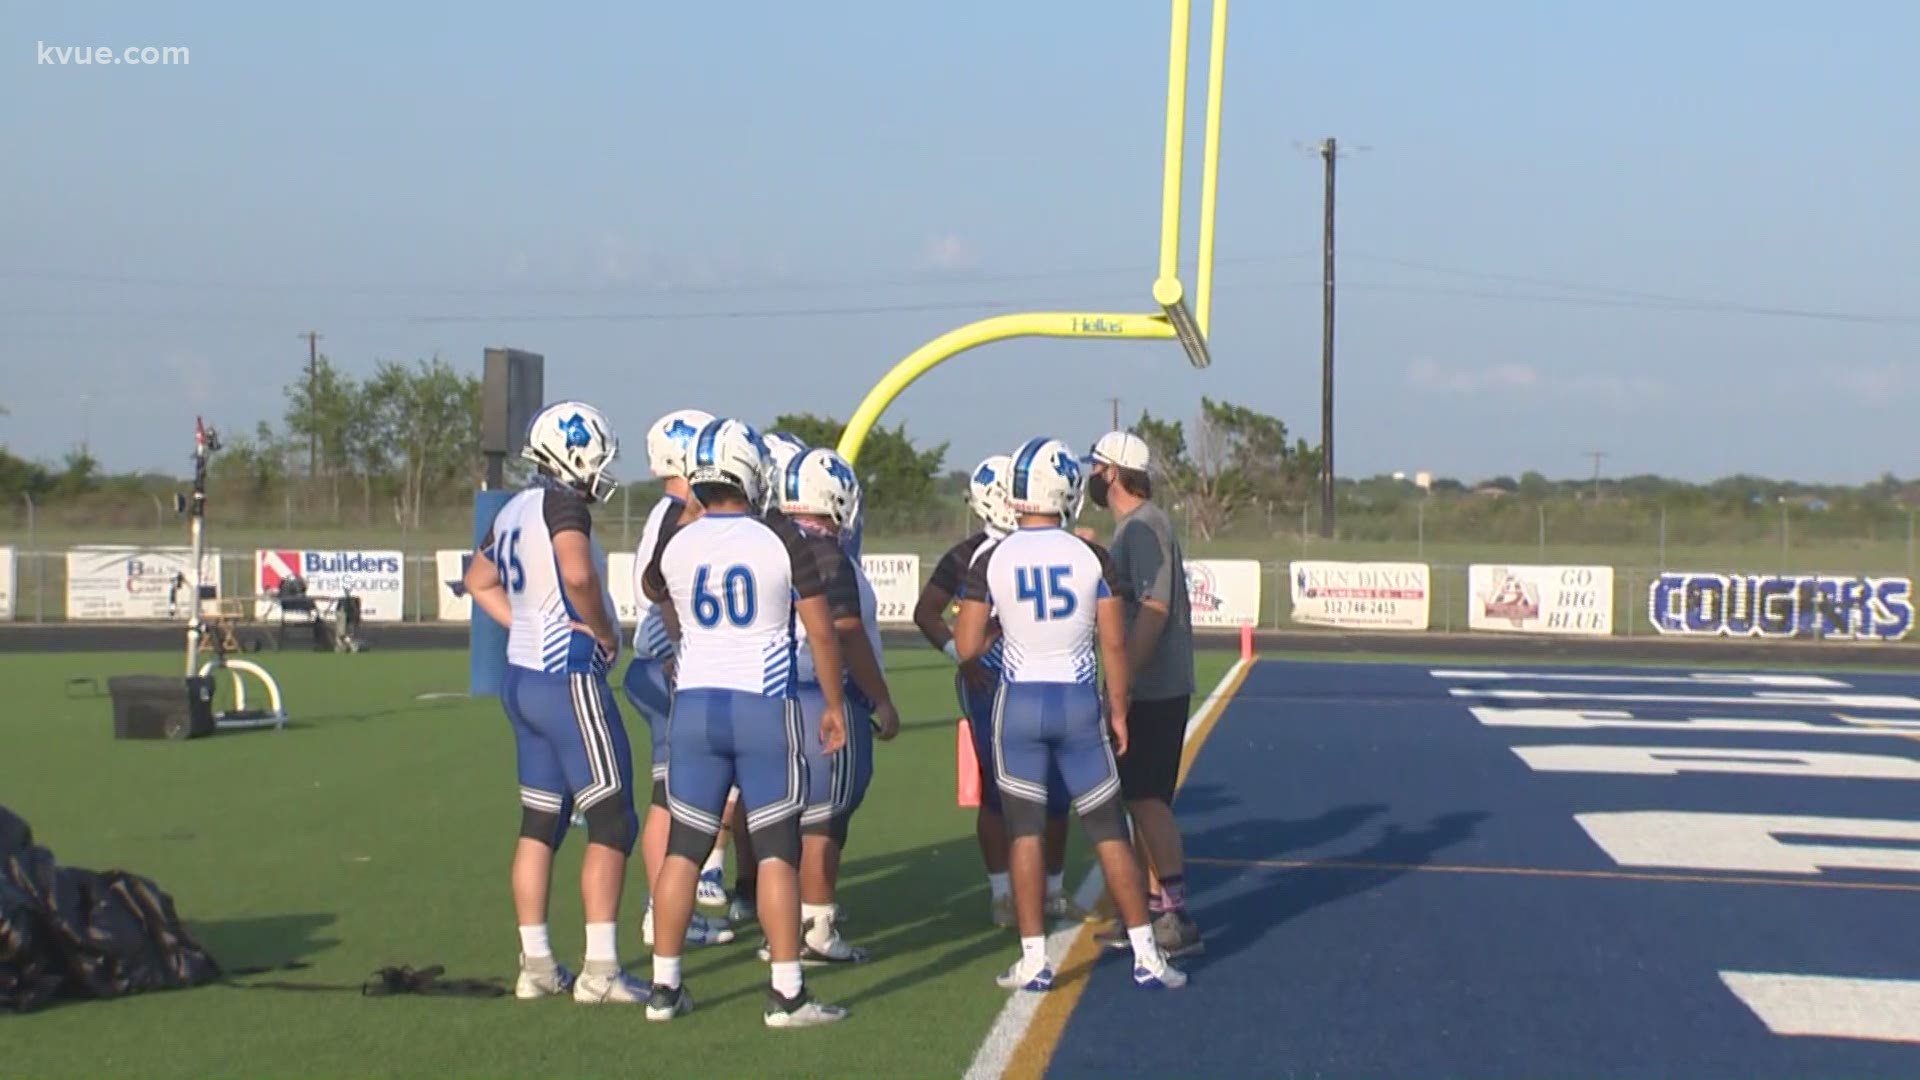 The Jarrell Cougars and Smithville Tigers matchup is KVUE's fourth Game of the Week of the 2020 season!